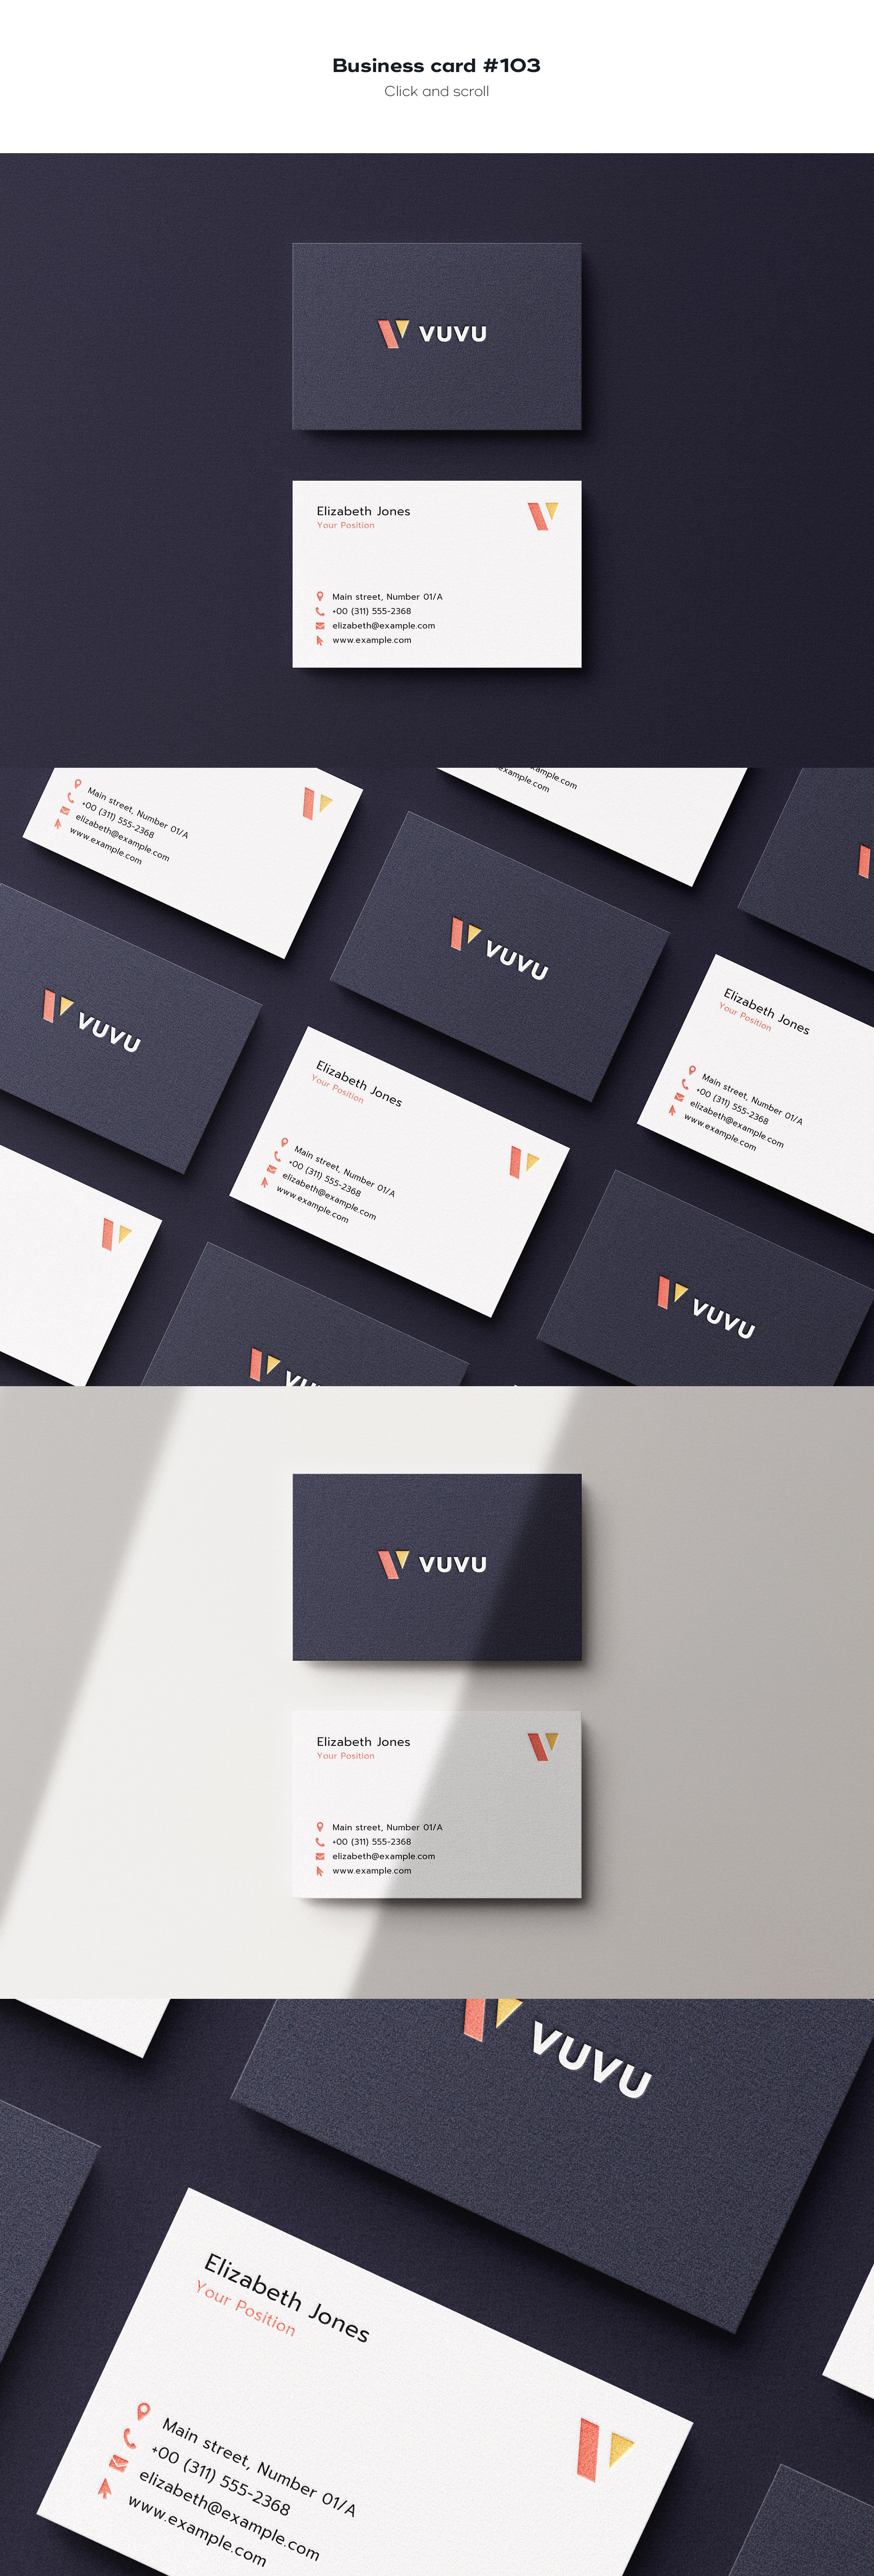 business card 103 662